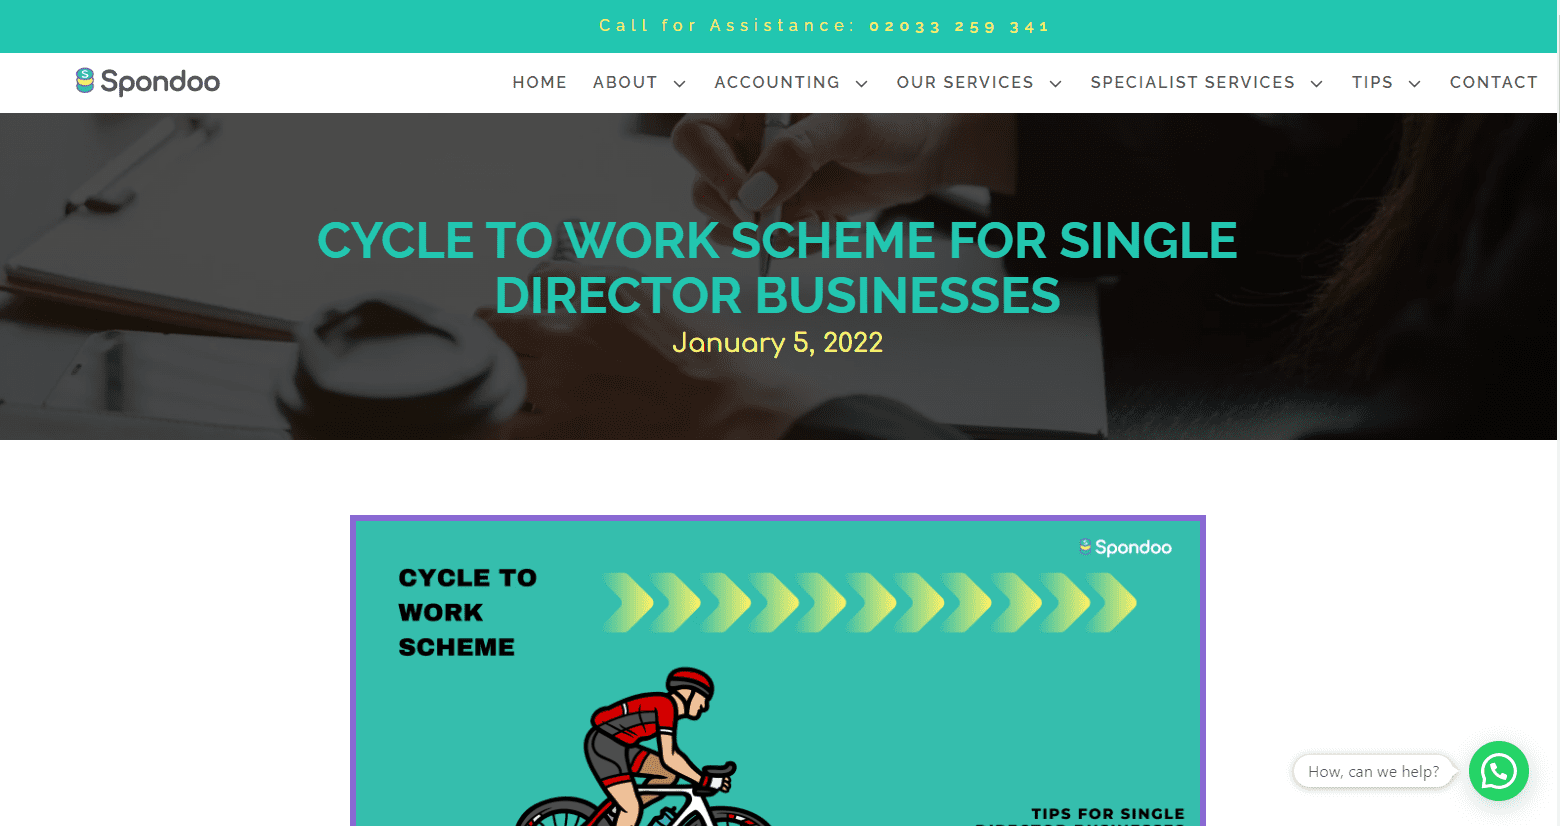 Website for accountancy firm with a blog post about the cycle to work scheme